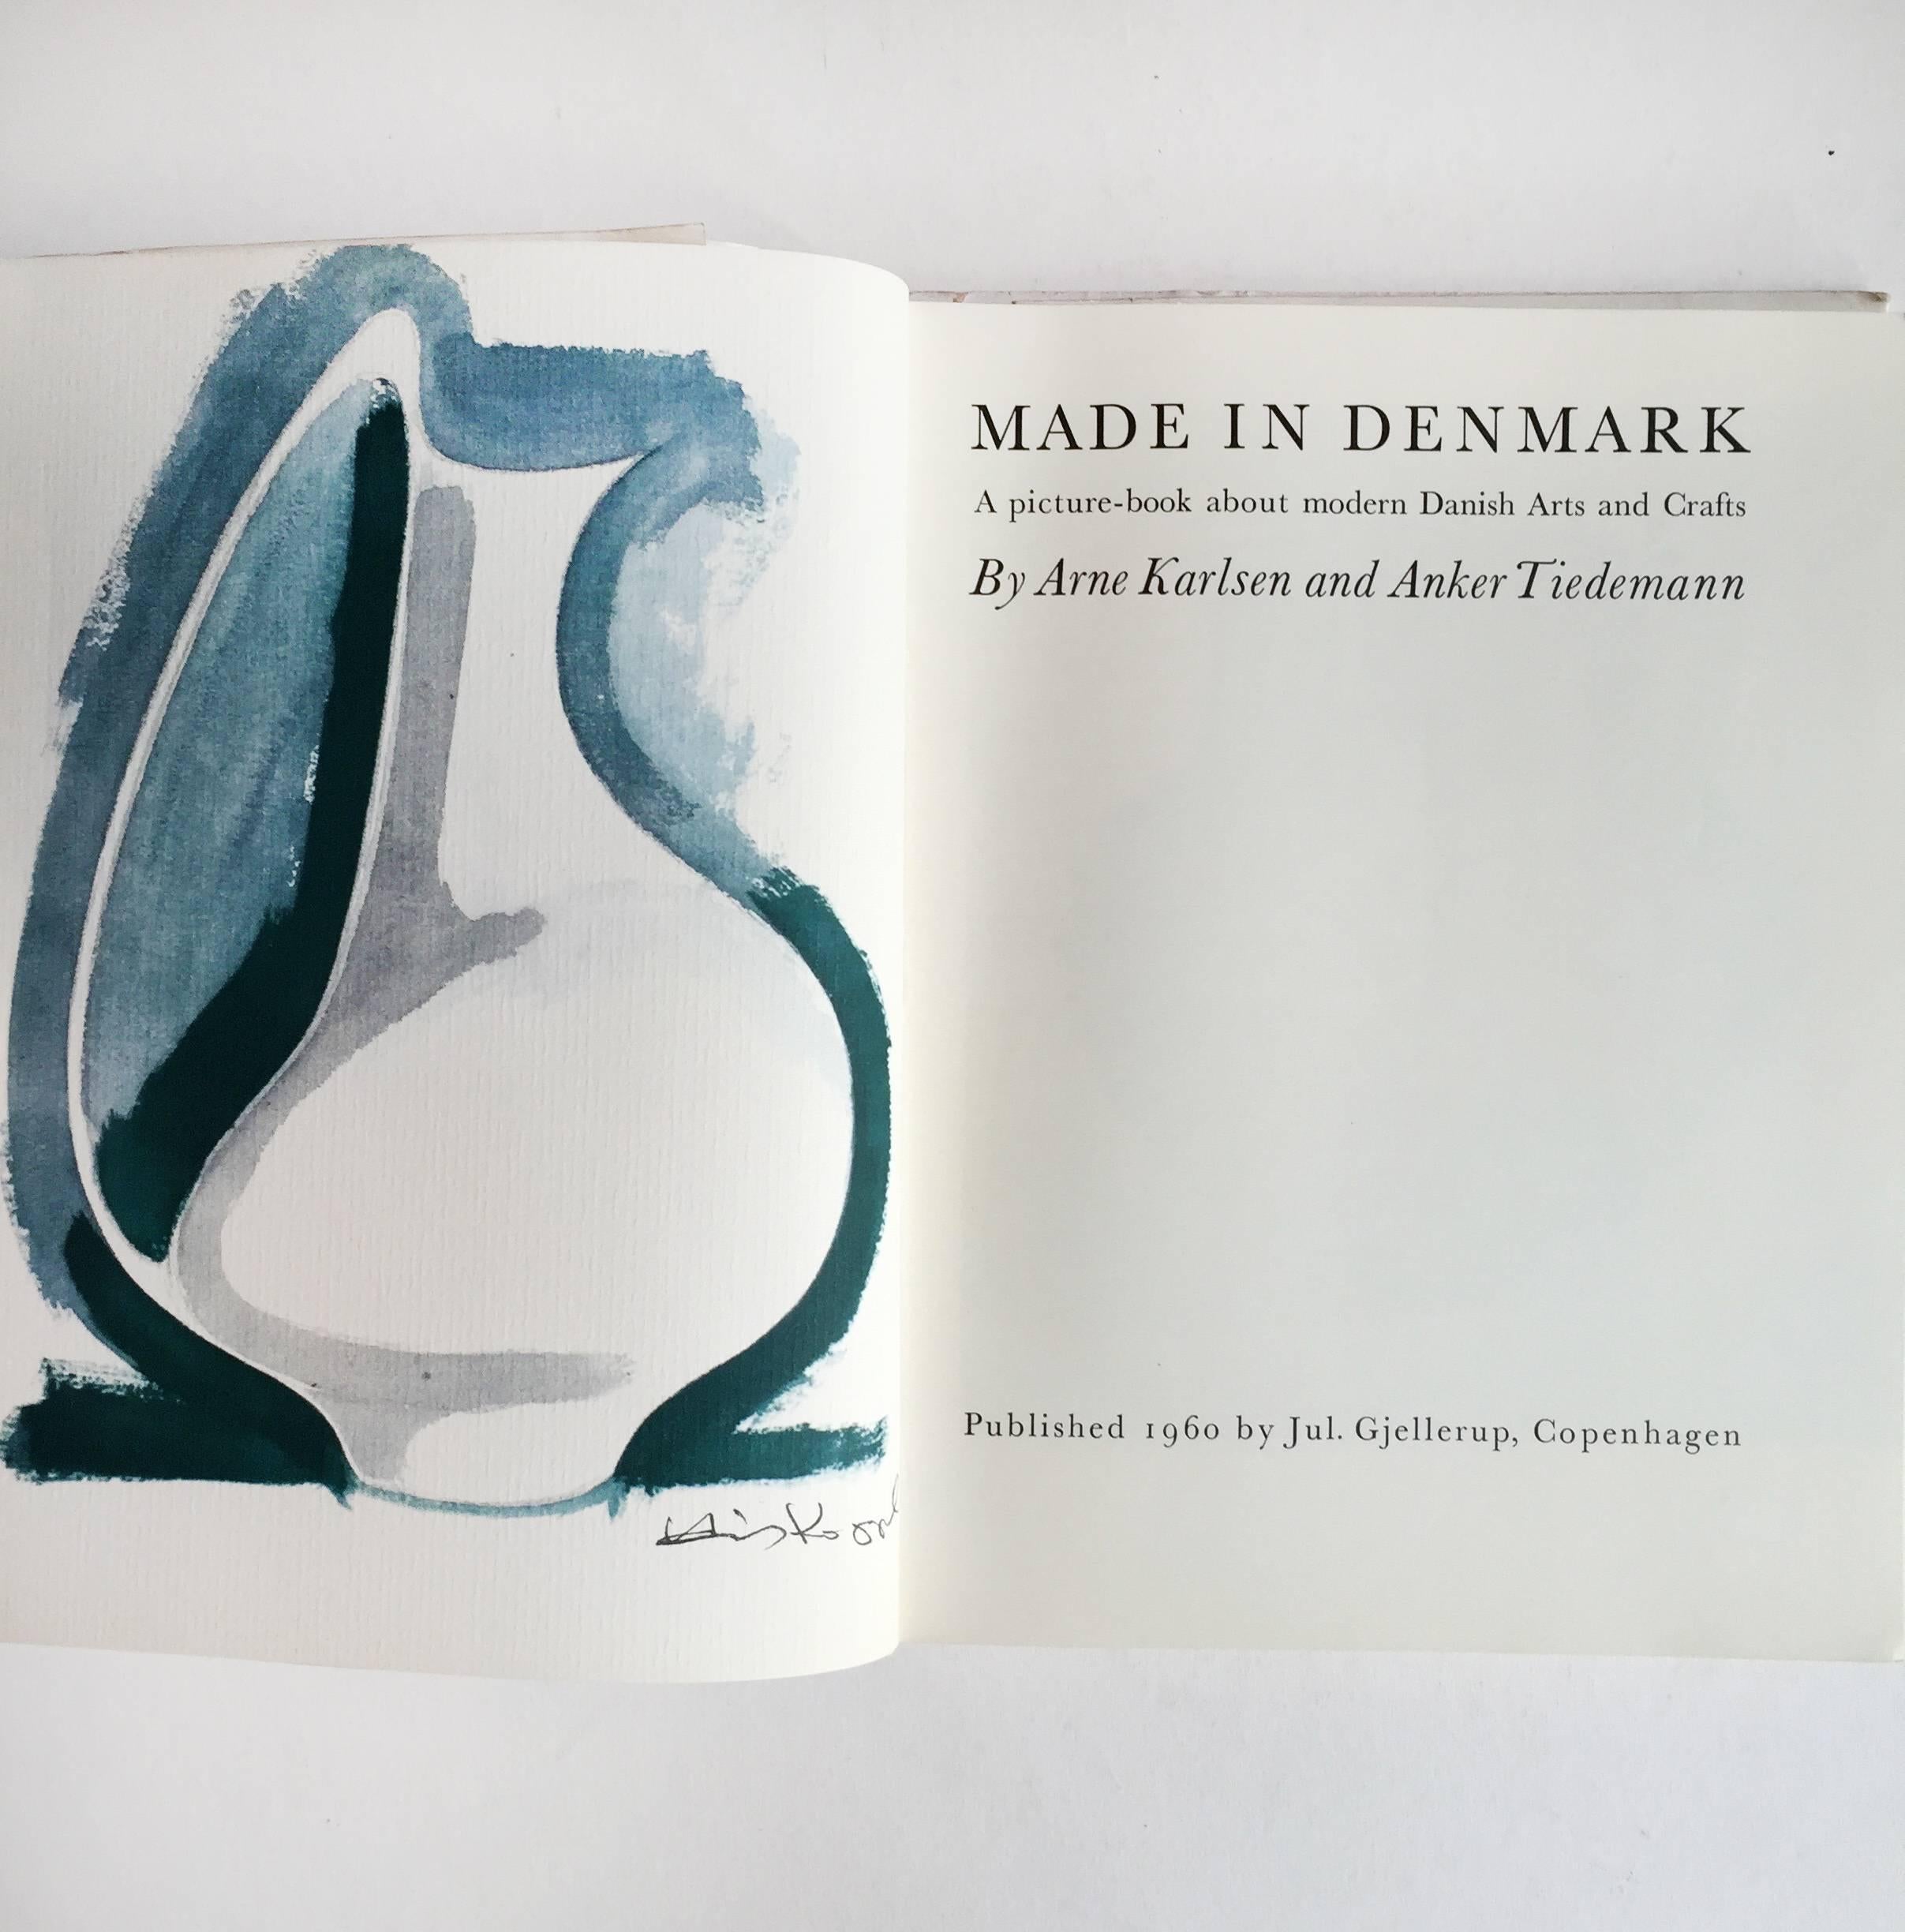 First edition, published by Jul. Gjellerup & Fritz Hansen, Copenhagen, 1960

‘Made In Denmark’; an elegantly illustrated introduction to the design and craft of Denmark. The beautiful thing about this book is the championing of the craftsmen and